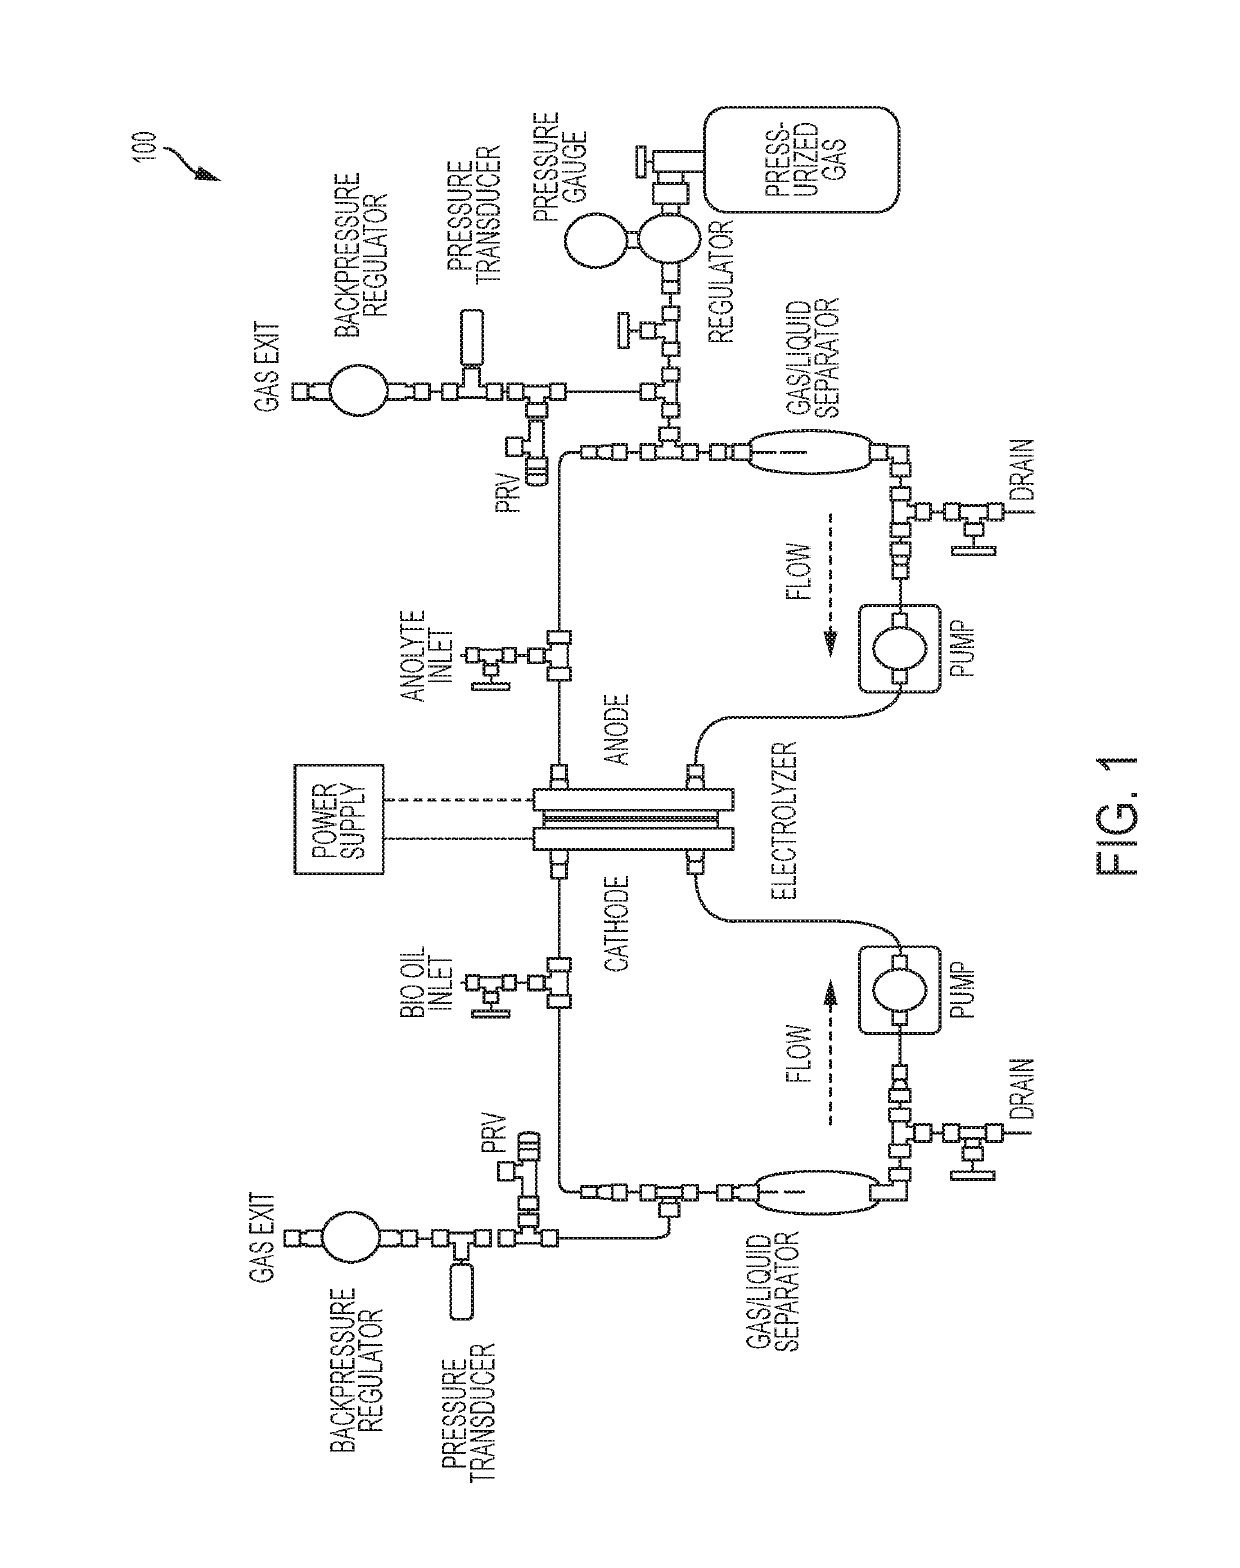 System and process for electrochemical upgrading of bio-oils and biocrudes